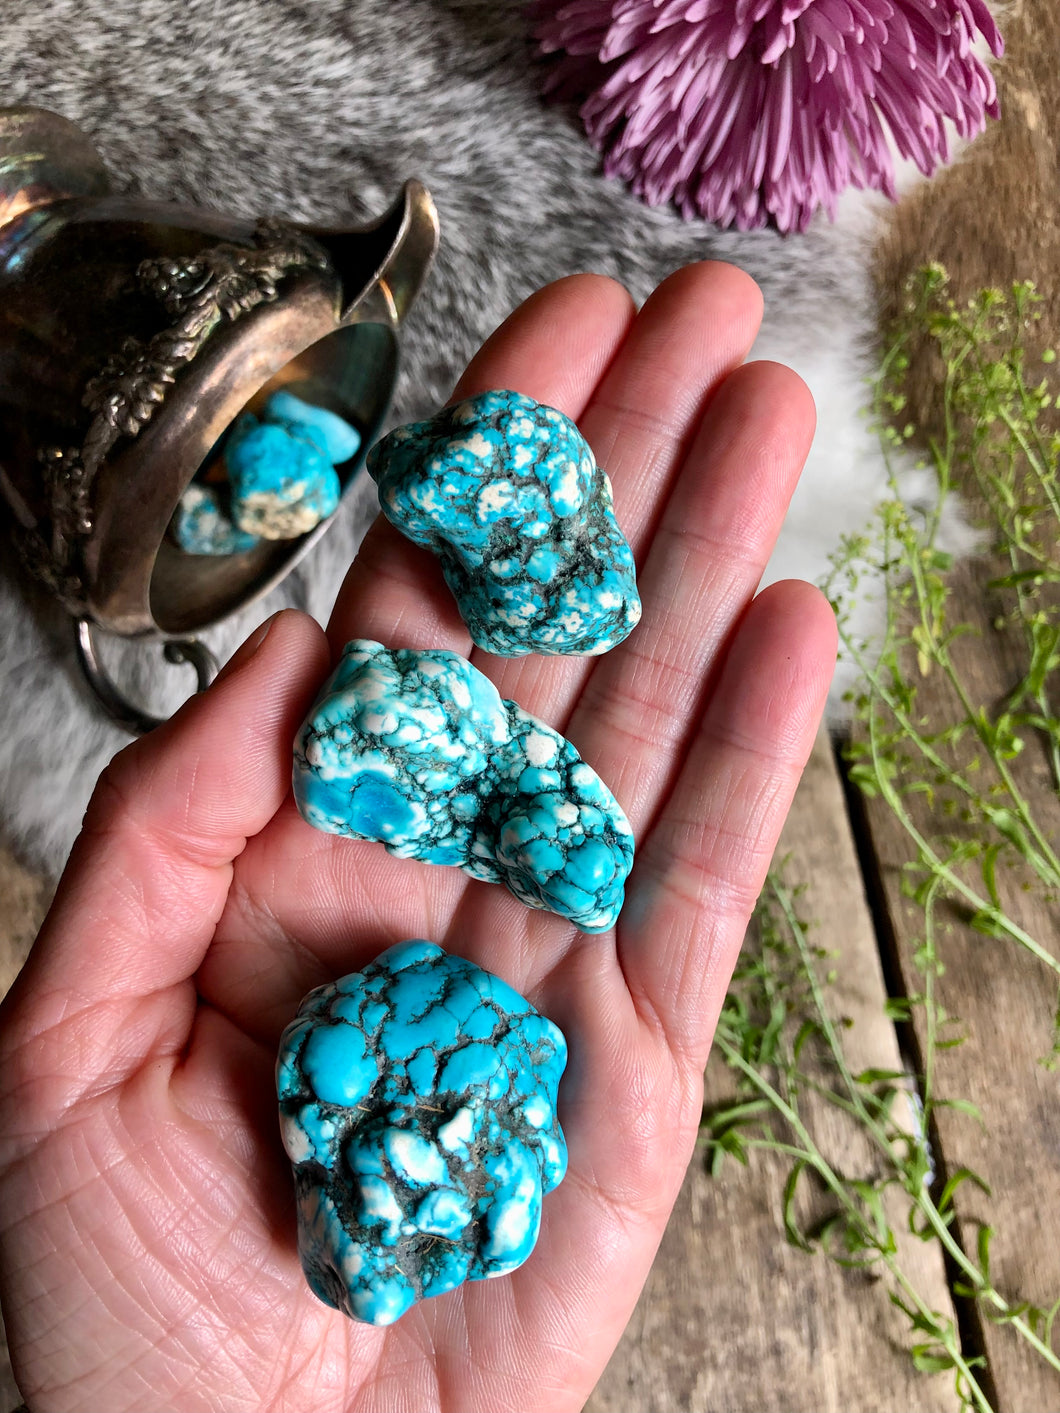 Large blue dyed howlite crystals lay in hand above boho background of fur, aged wood and pink and green foliage